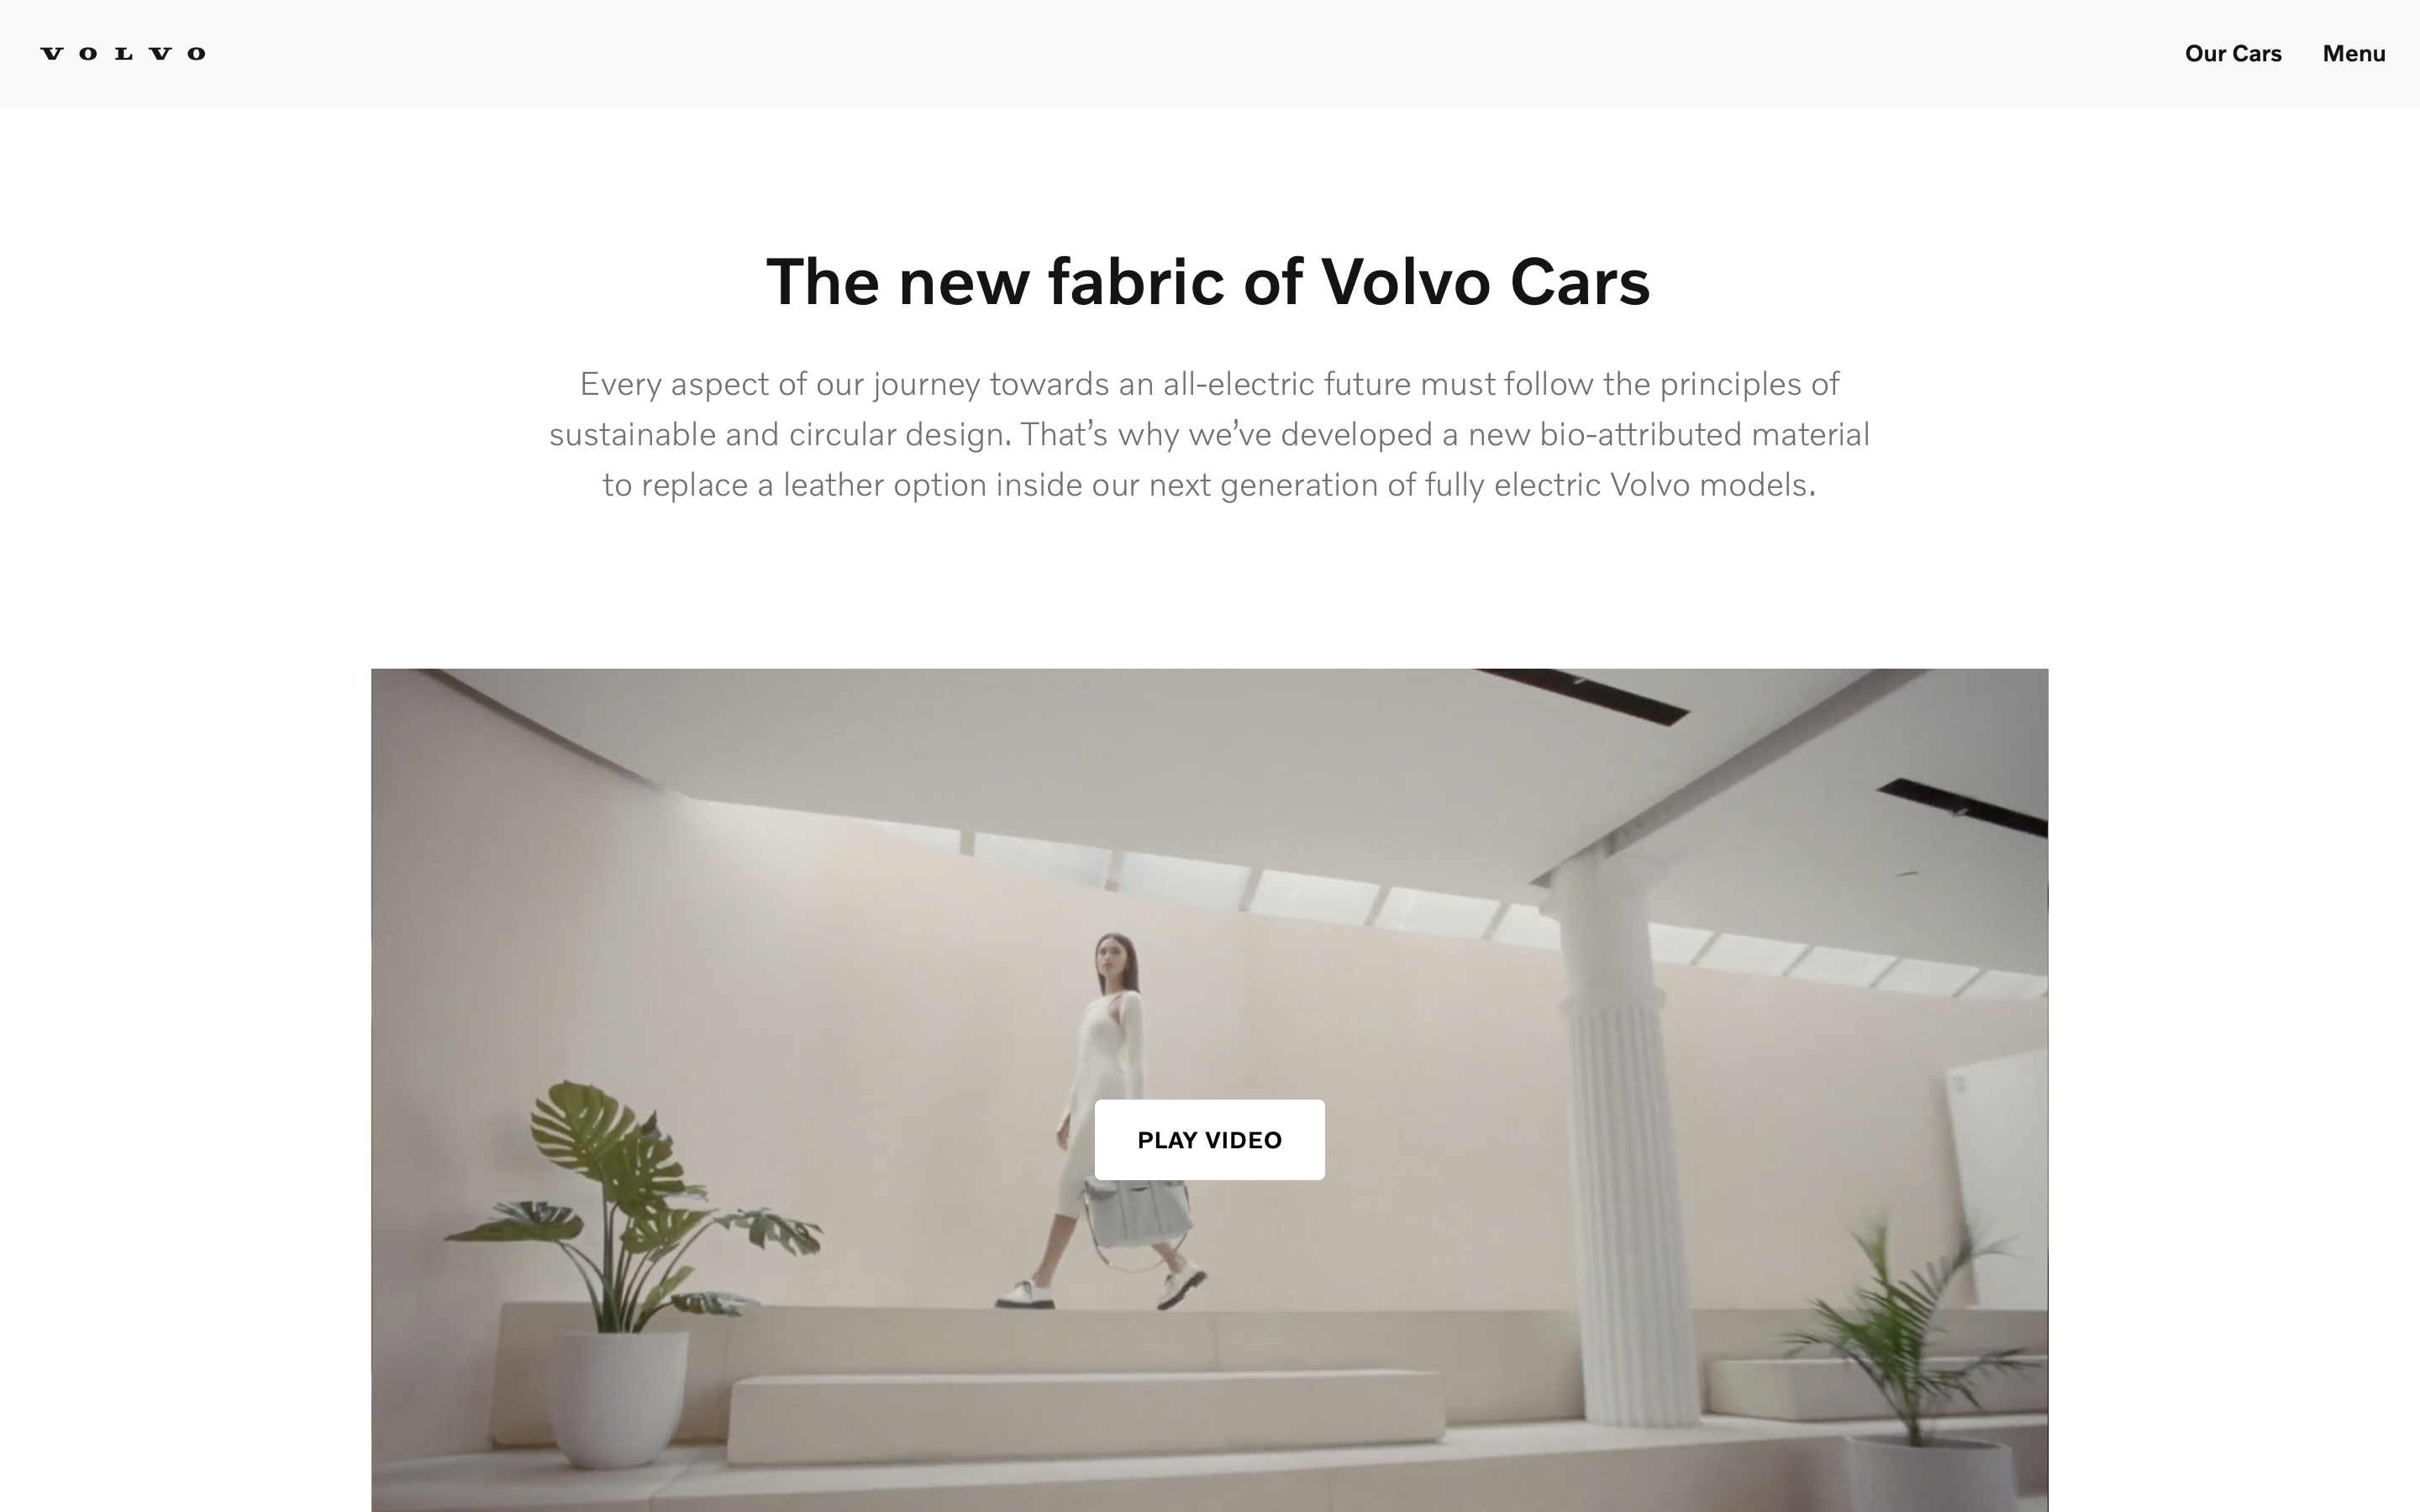 A screenshot of the new fabric of Volvo Cars campaign site